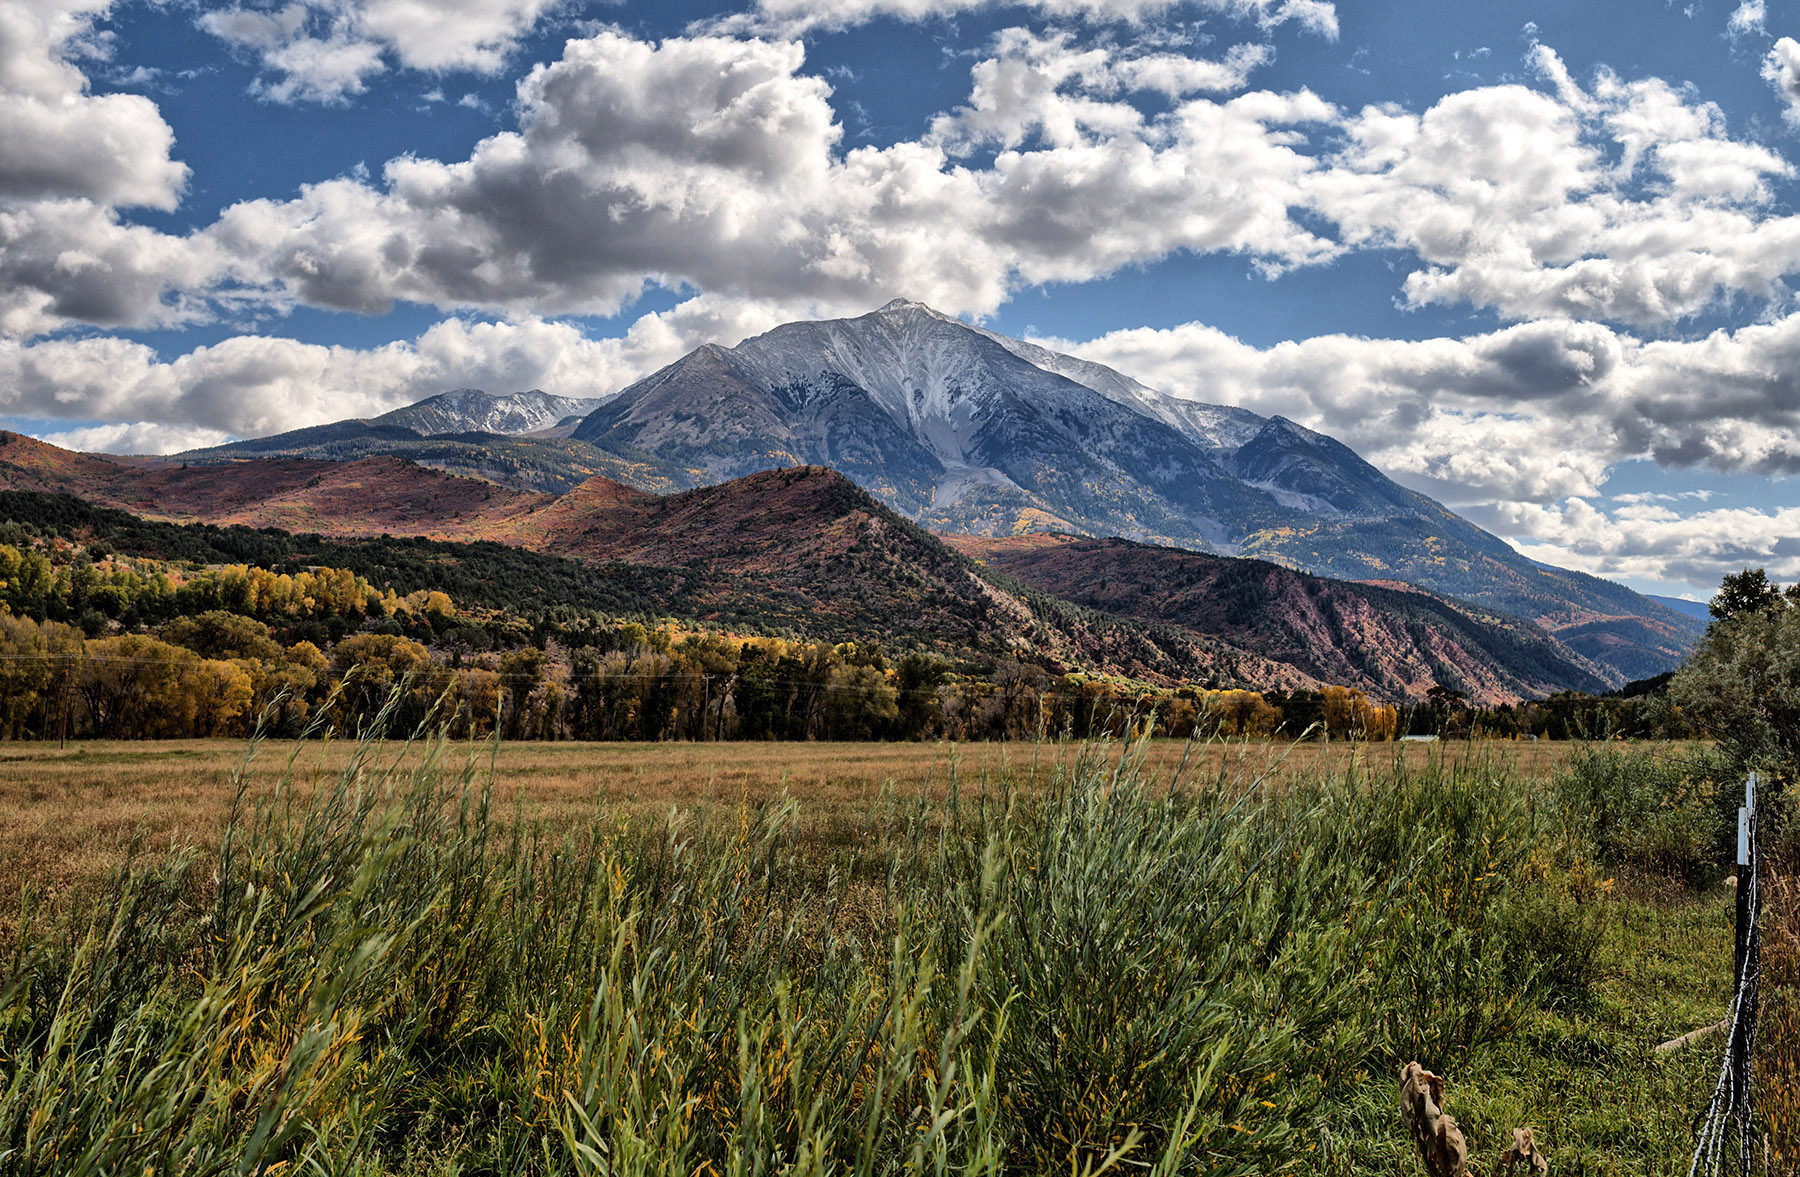 Mt. Sopris viewed from Colorado Highway 133 north of Carbondale, Co.  This was formed by an intrusion of igneous rock (quartz monzonite) during the Tertiary period (25-50 Ma) with subsequent erosion of overlying sedimentary rock and modified by glacial action.